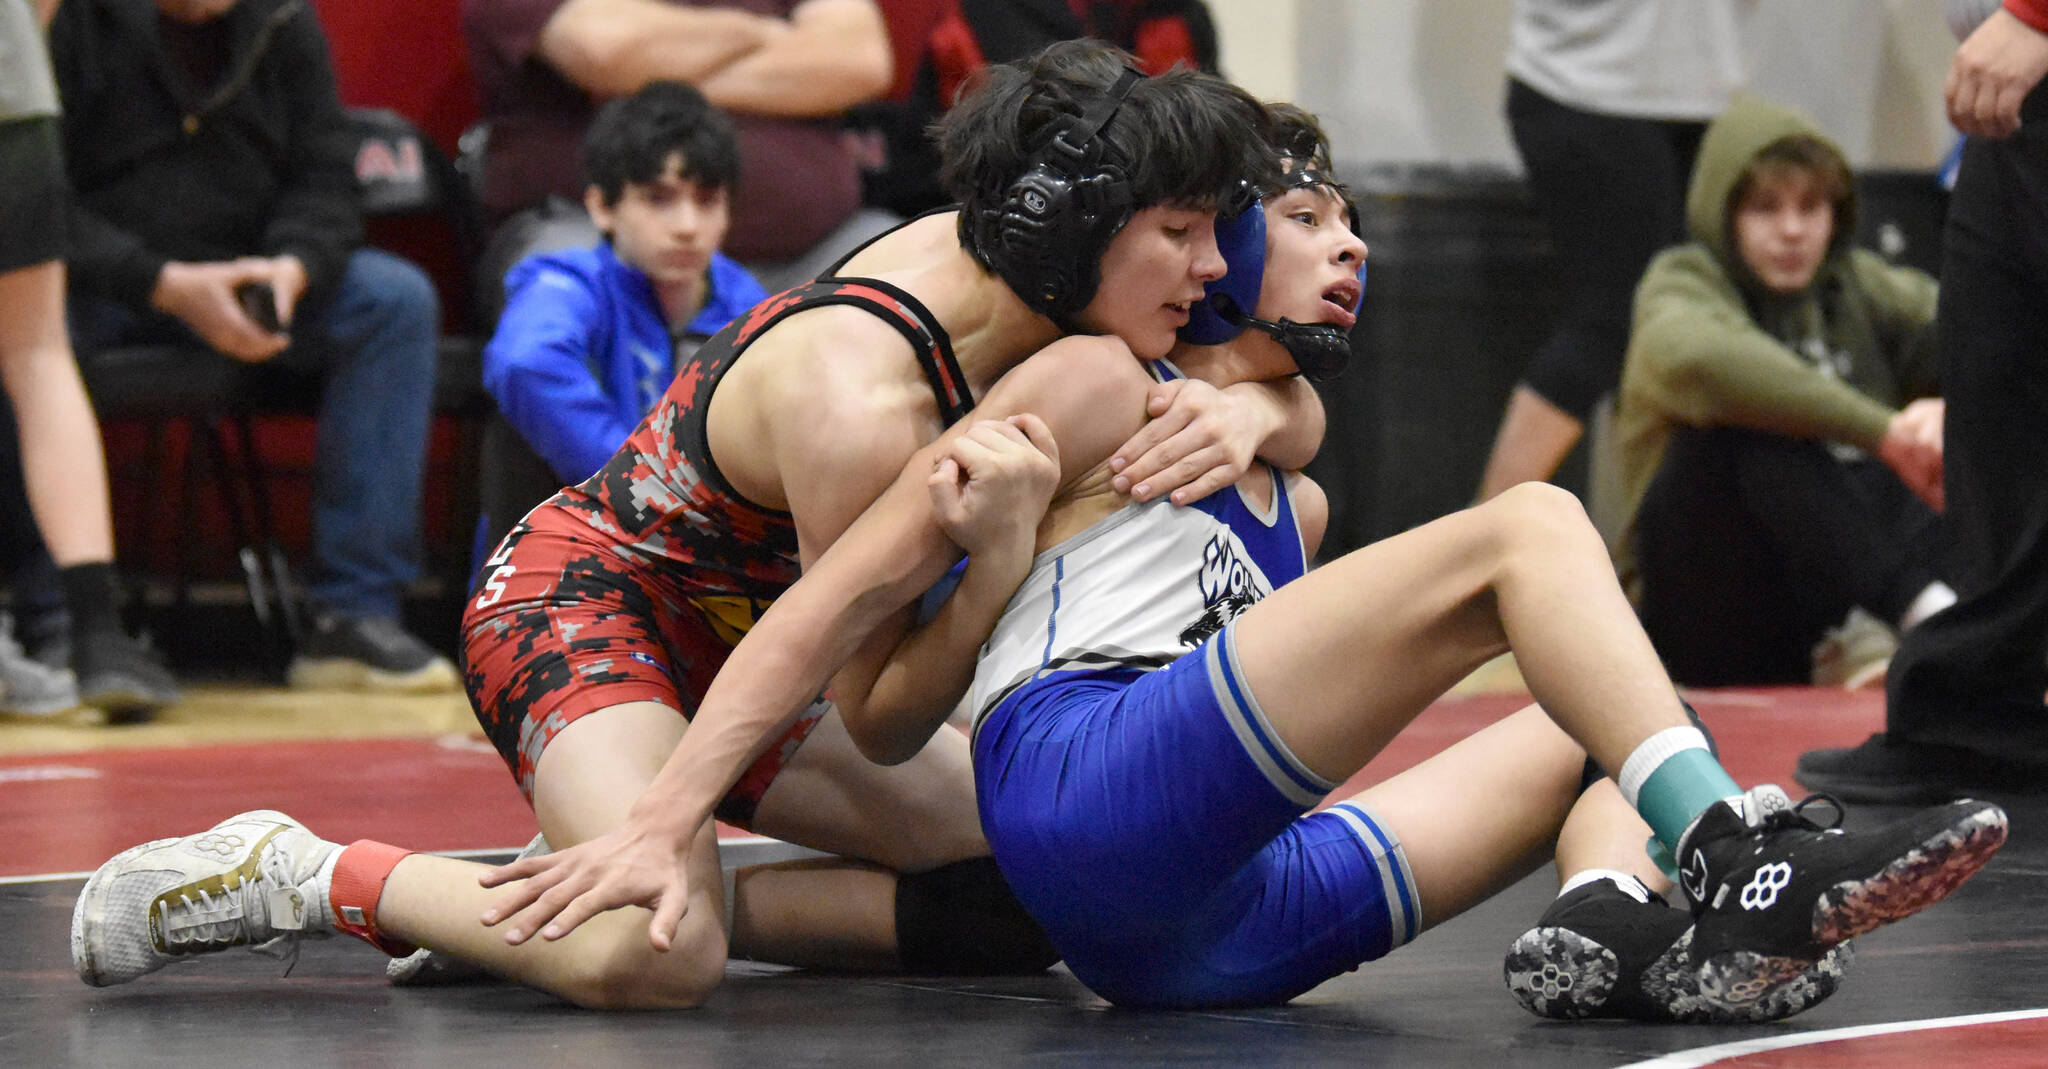 Kenai Central’s Gunnar Stanley and Cordova’s Blake Bailey wrestle at 125 pounds at the Kachemak Conference wrestling tournament at Kenai Central High School in Kenai, Alaska, on Saturday, Dec. 9, 2023. Stanley won an 11-10 decision. (Photo by Jeff Helminiak/Peninsula Clarion)